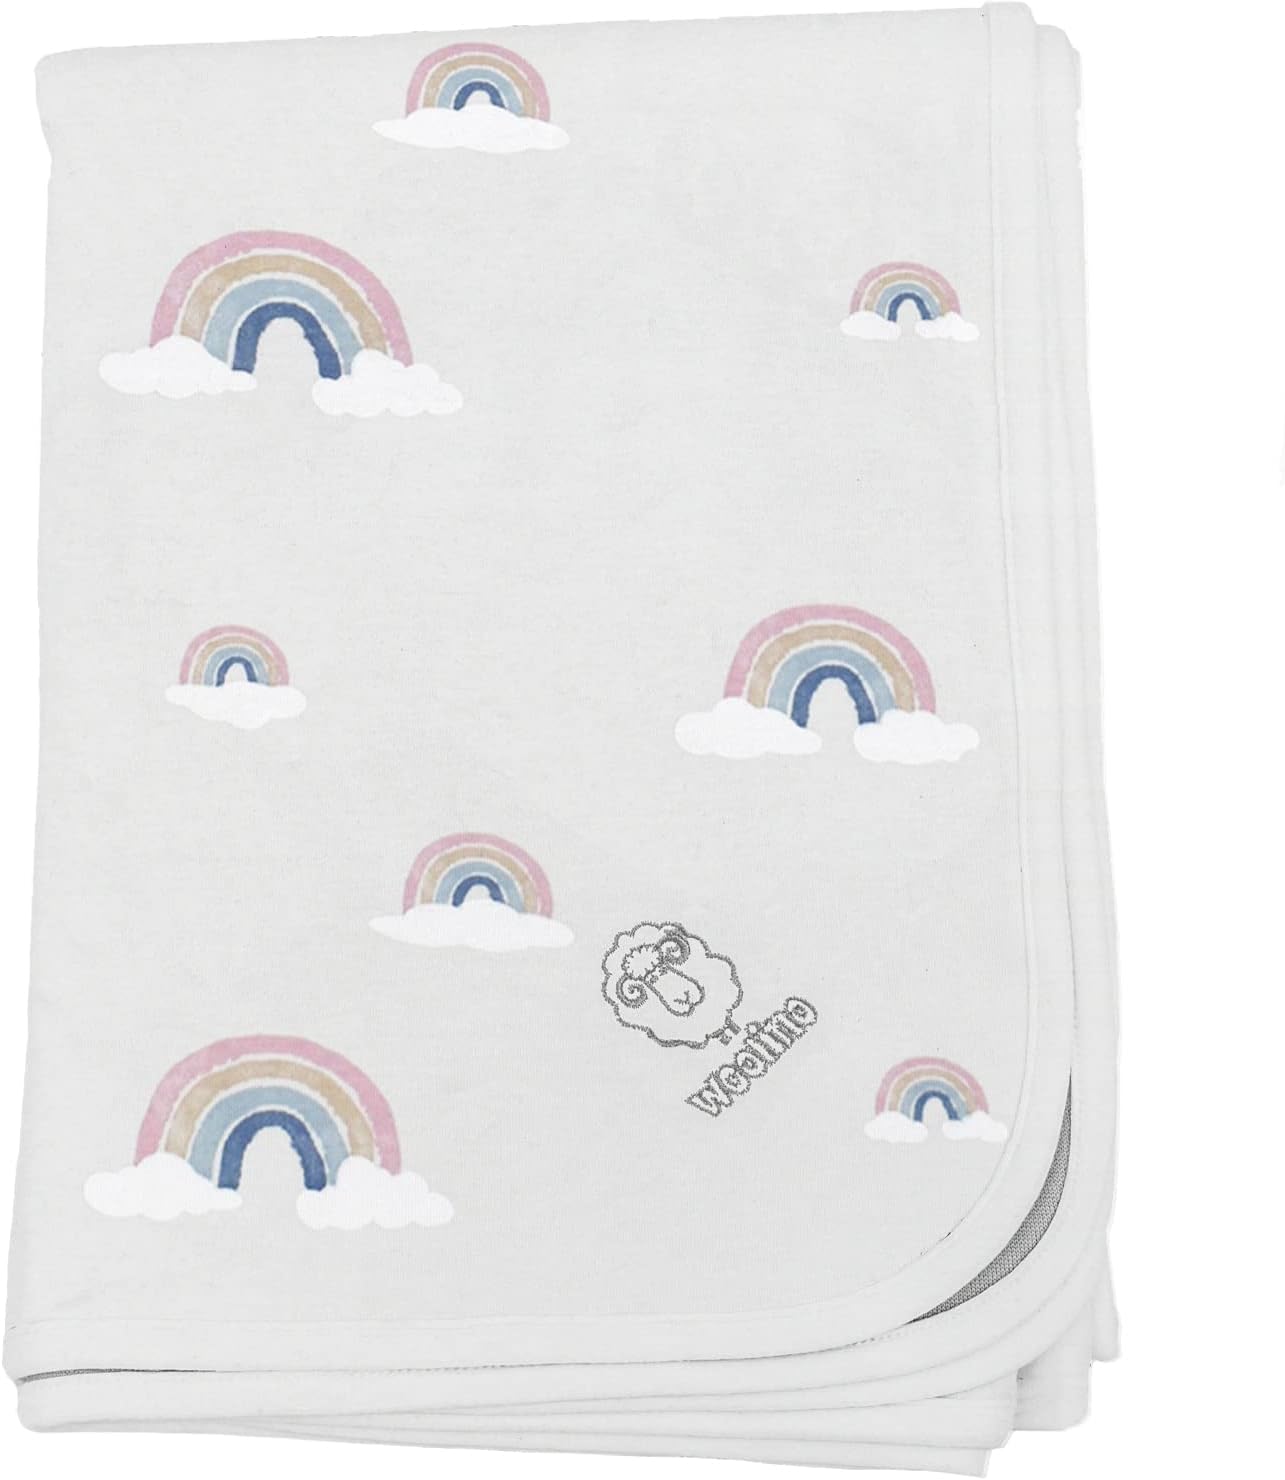 A merino wool toddler blanket with rainbows from Woolino